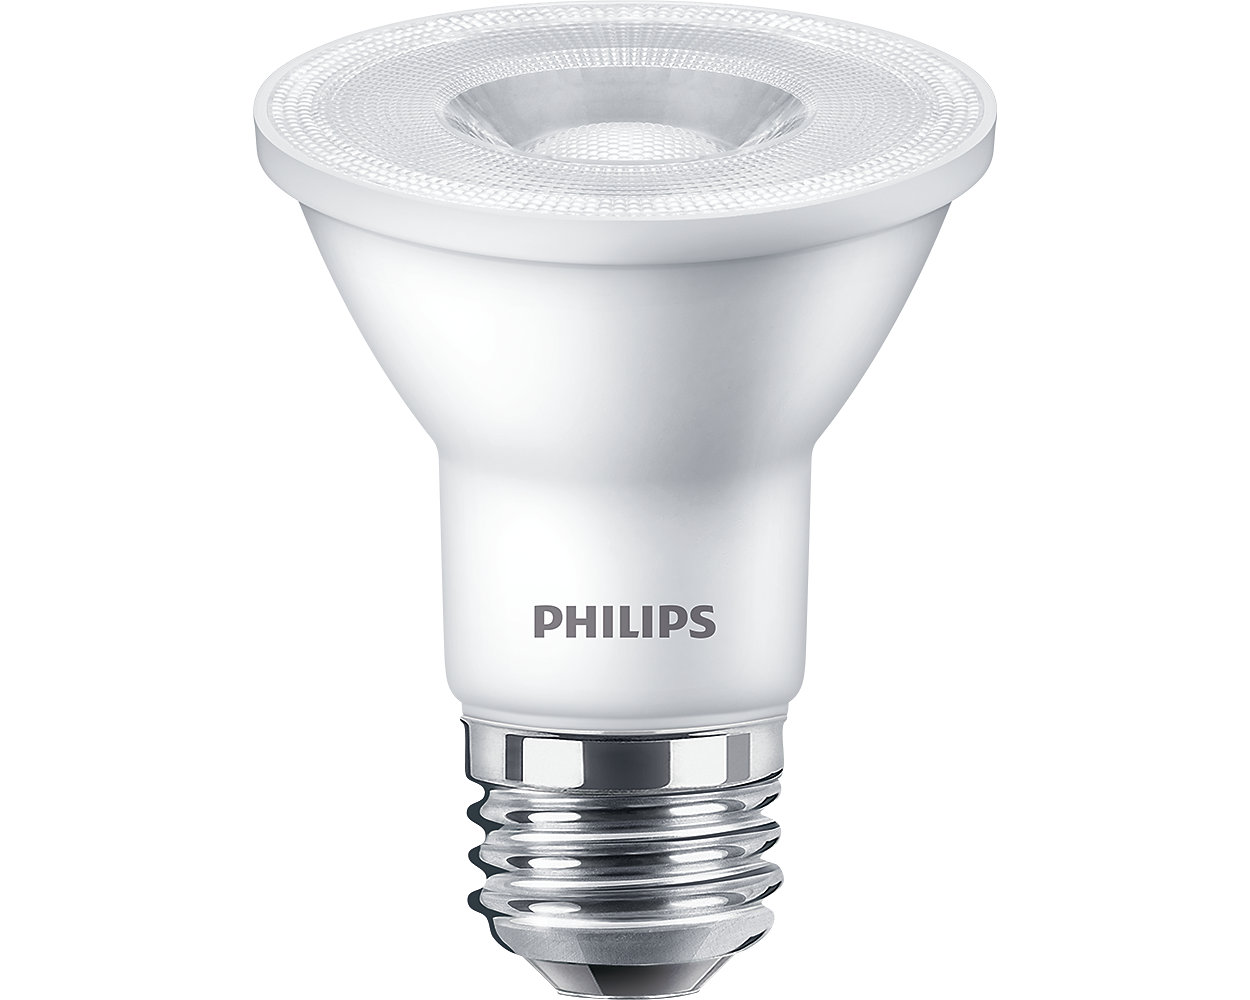 The optimal LED accent light with a seamless look.